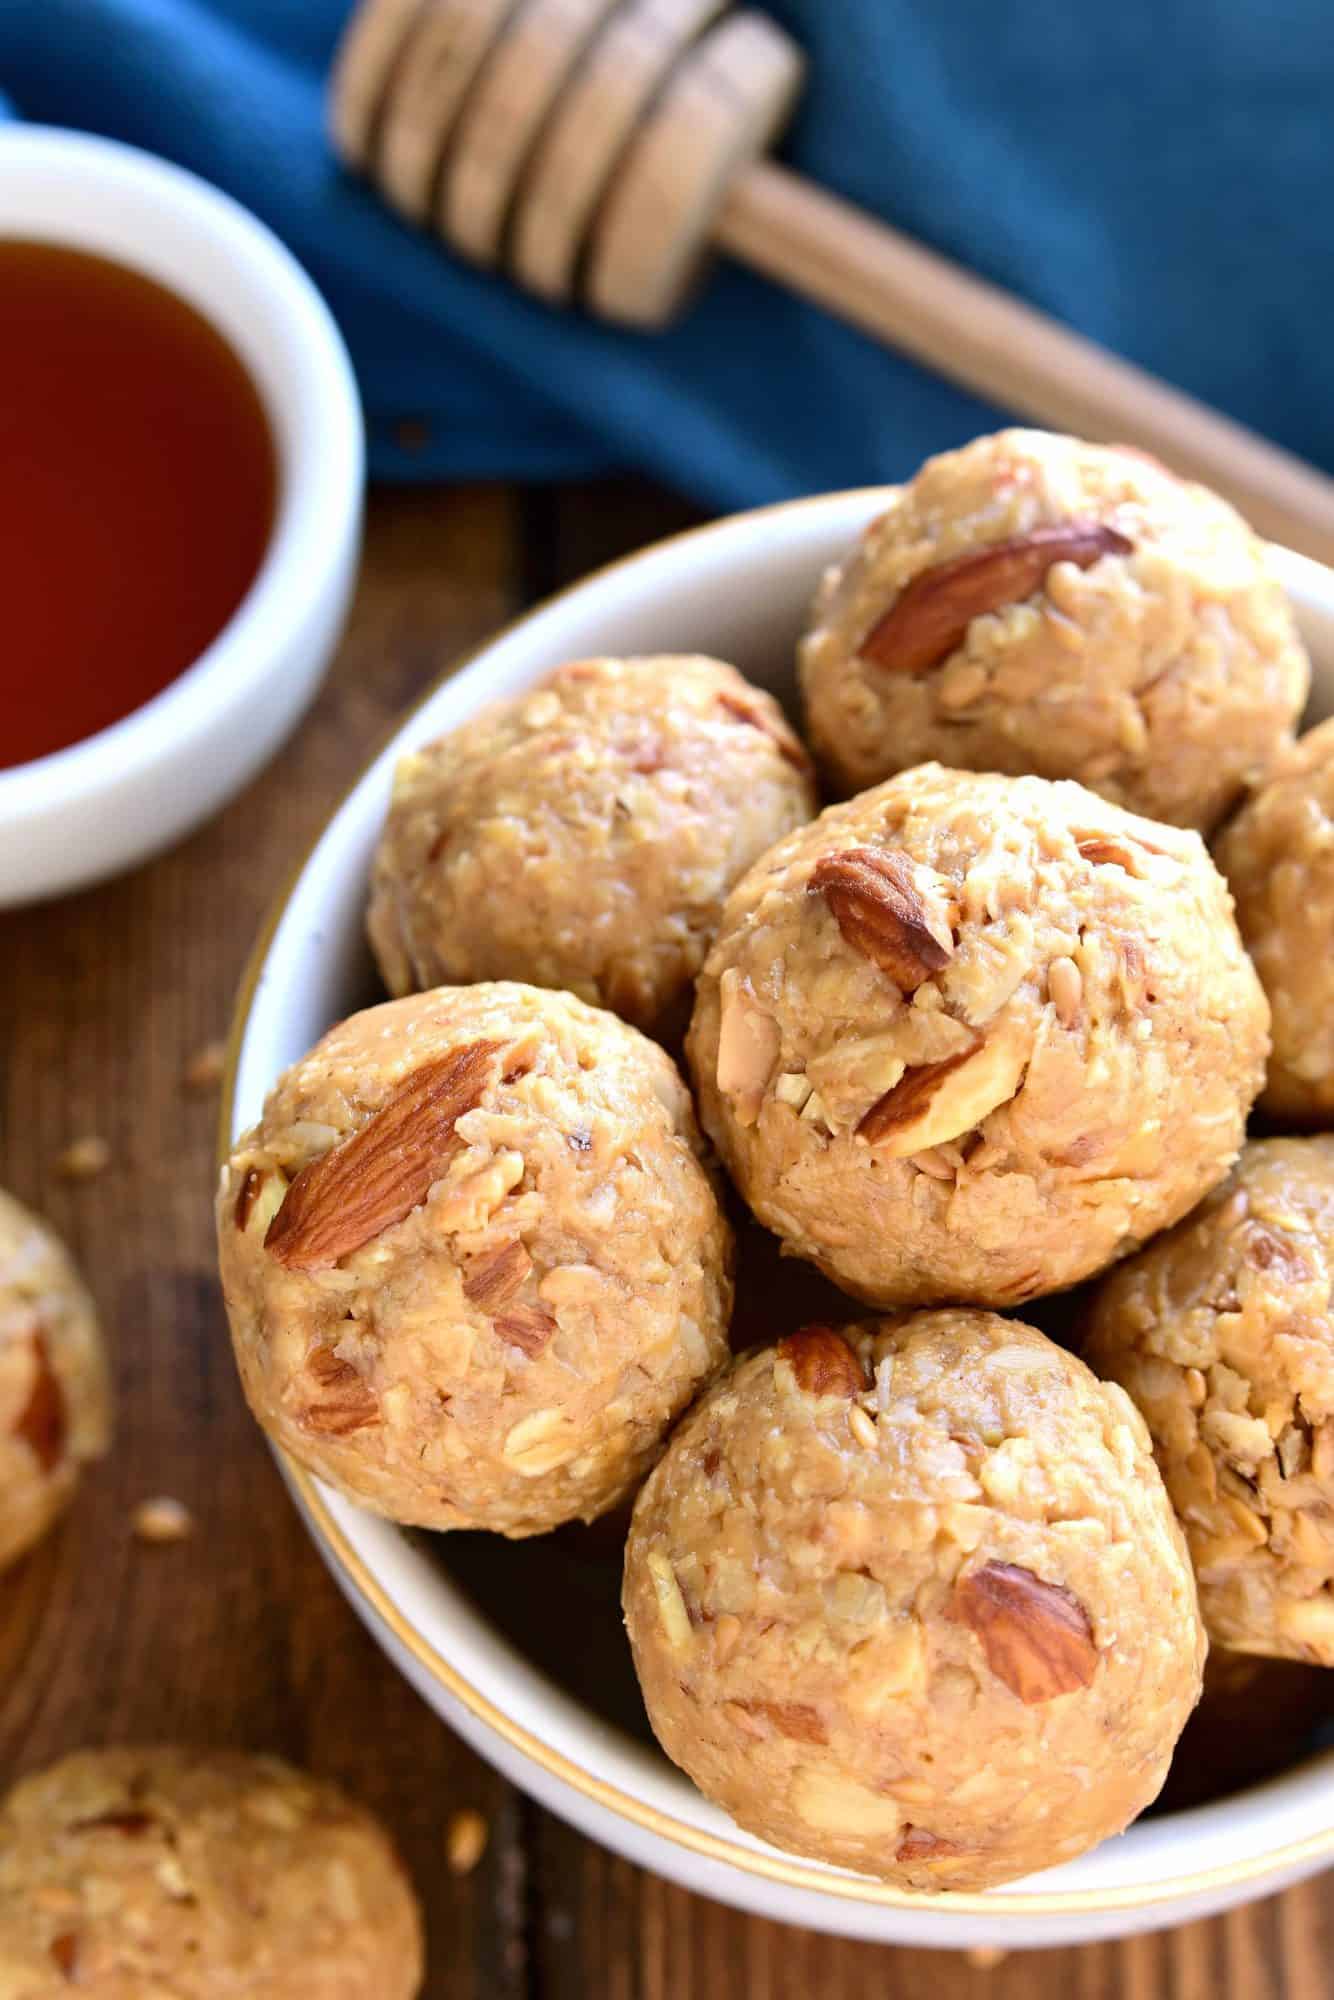 These Honey Almond Energy Bites are packed with healthy ingredients and perfect for a quick snack!